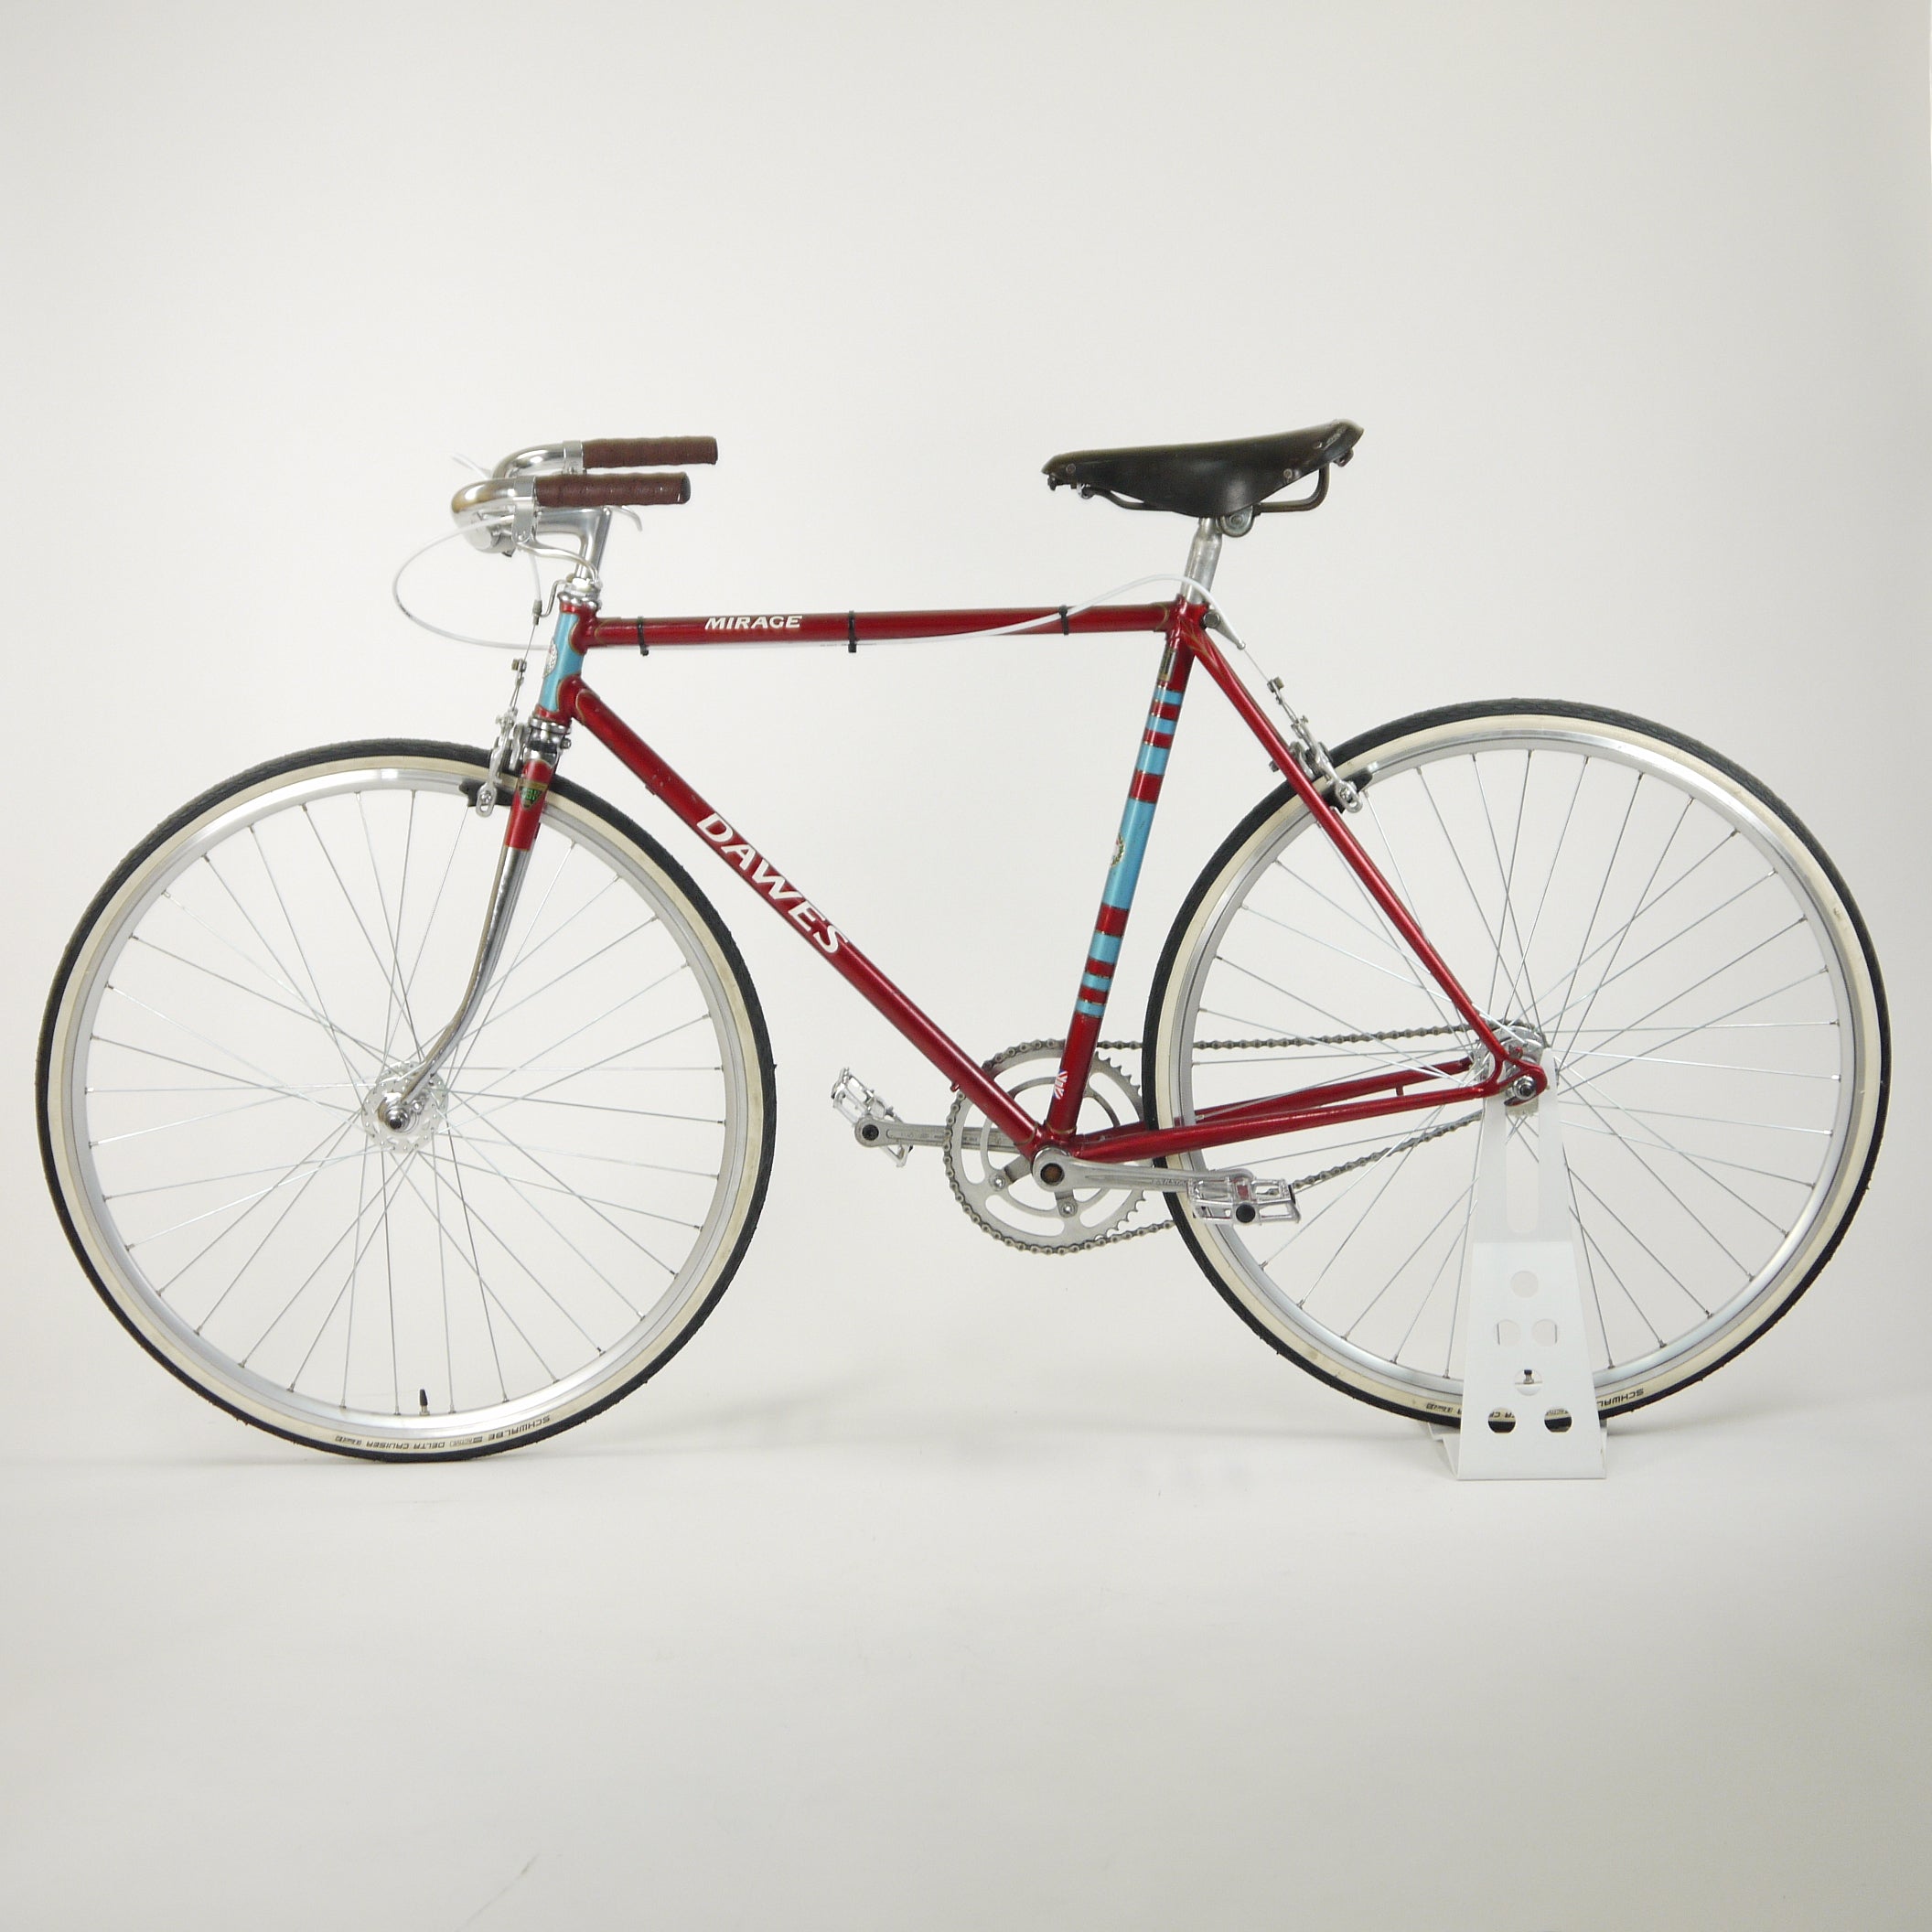 A red Dawes Mirage road bike's non-drive side